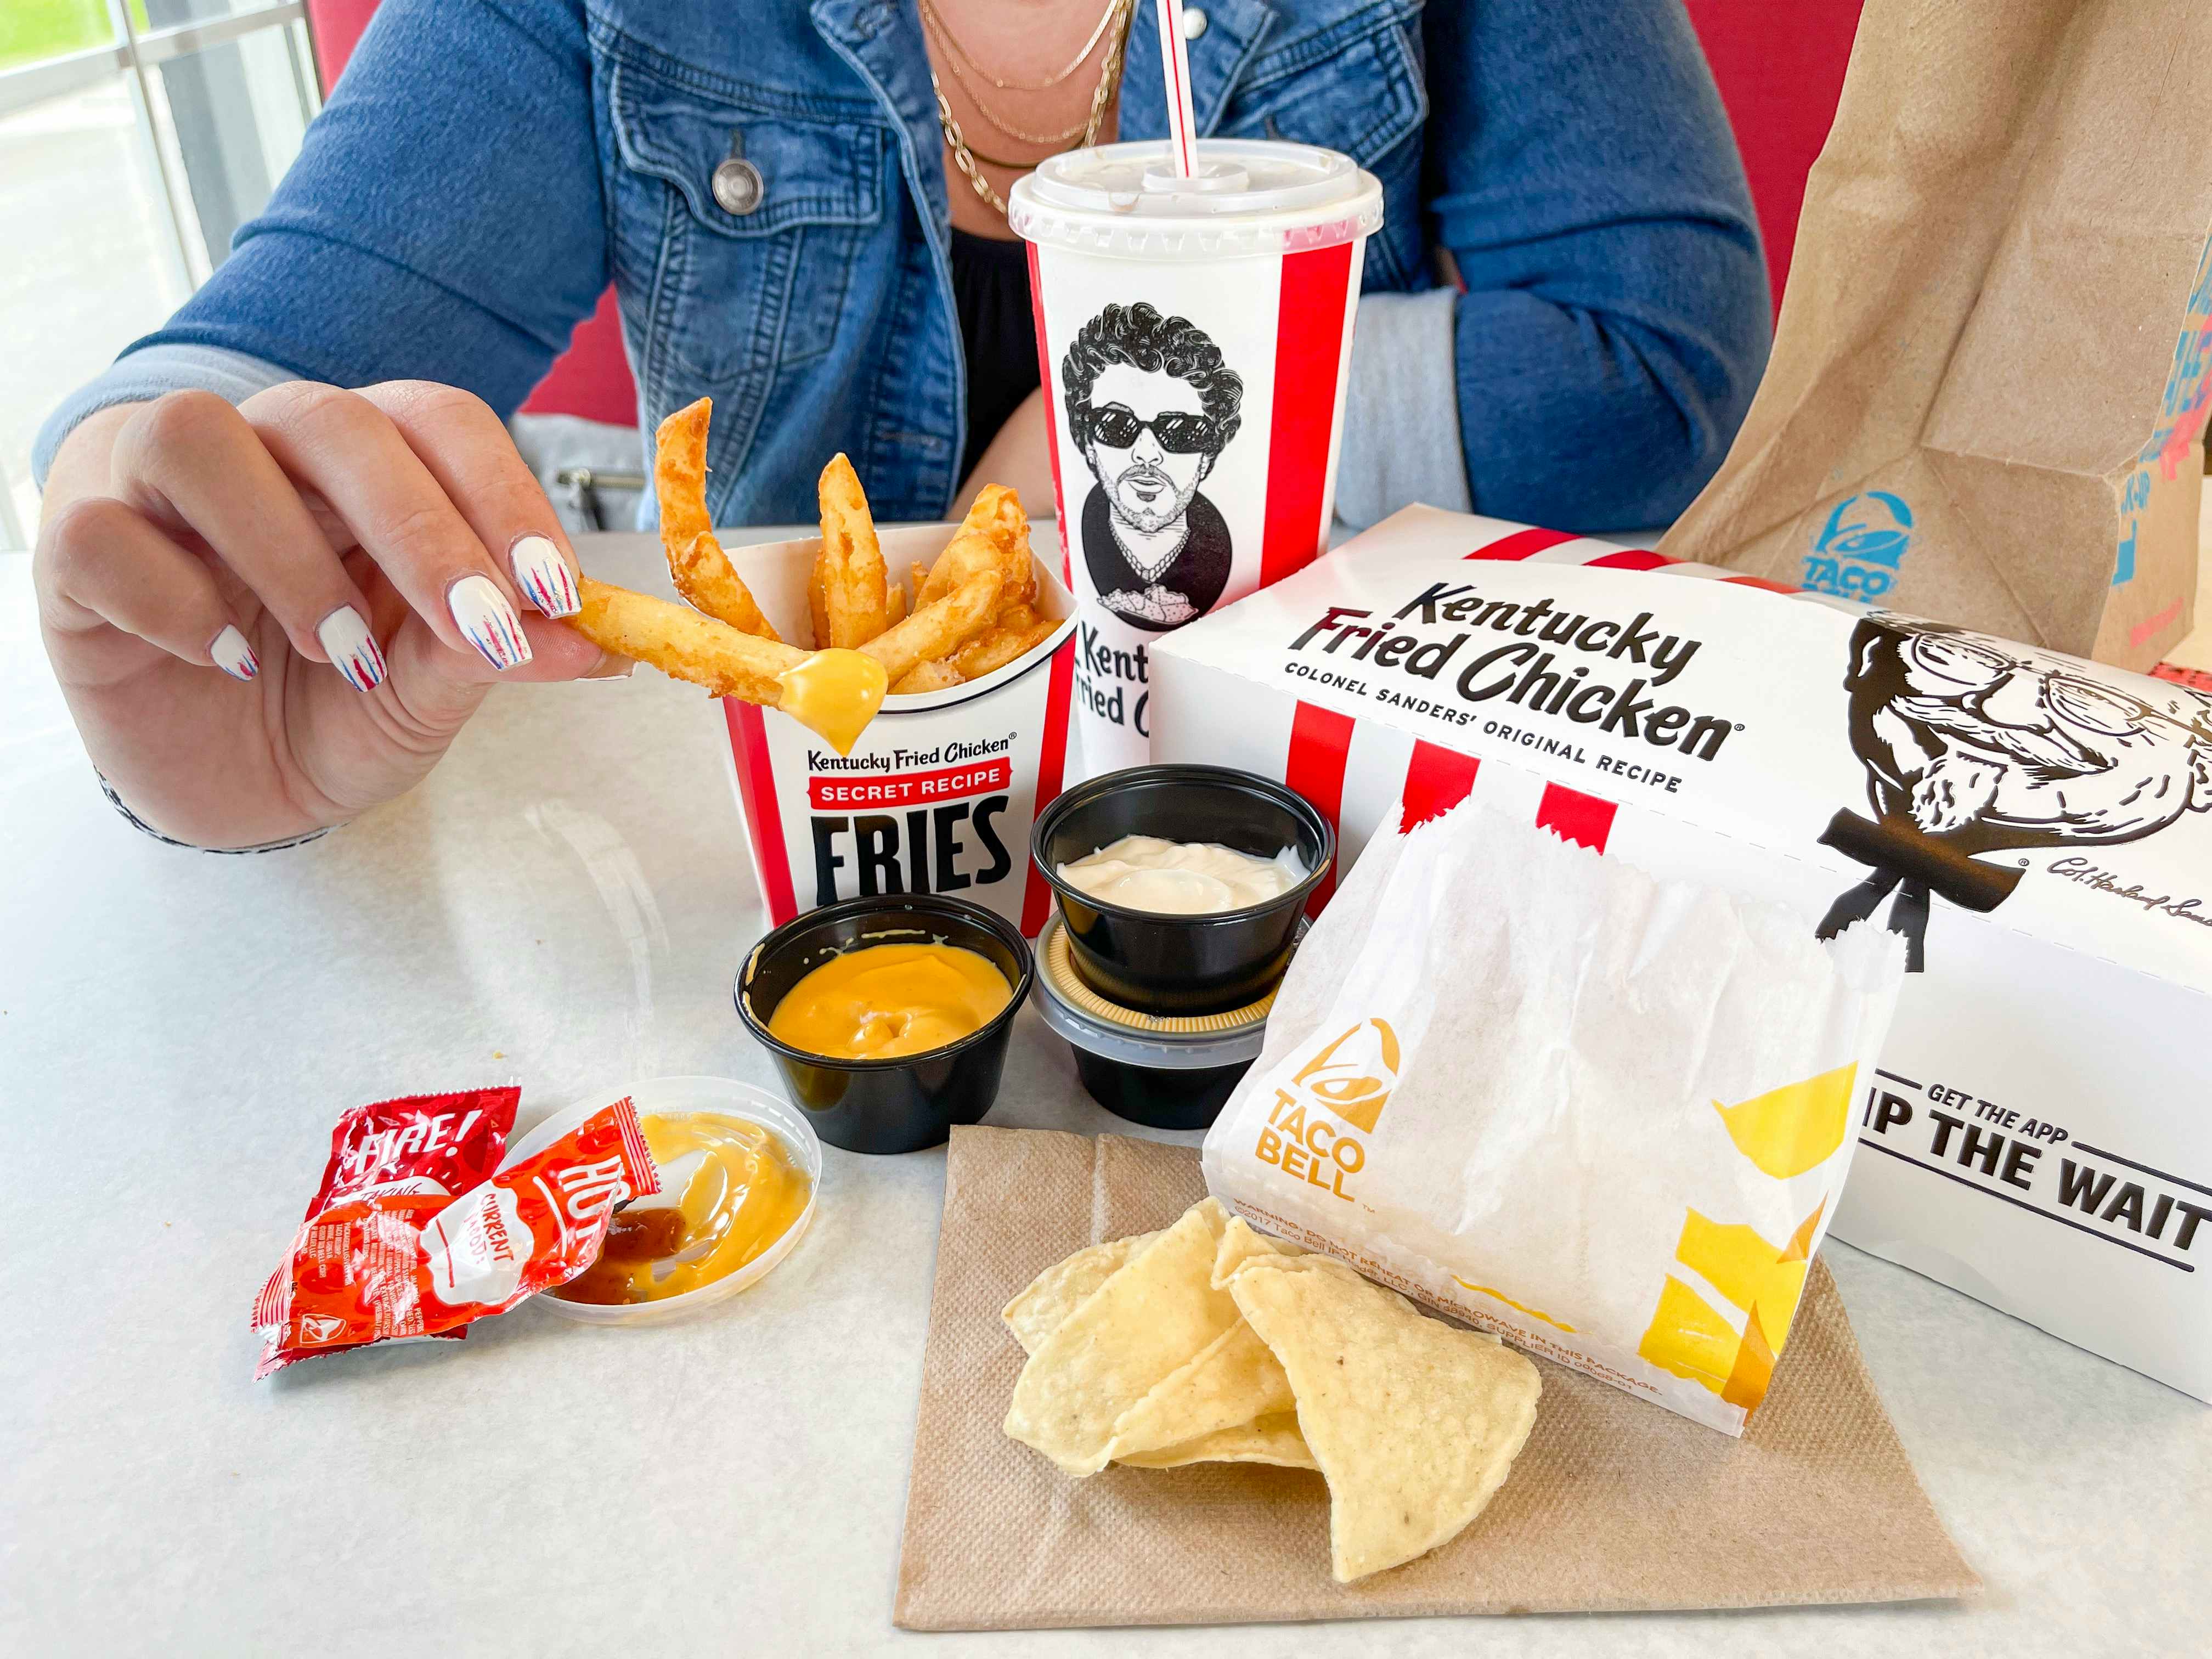 A KFC box of fries on a table next to a KFC box, a Taco Bell paper bag, some chips, nacho cheese sauce, and Taco Bell hot and fire sauce packets with a person holding a fry that has been dipped in nacho cheese..